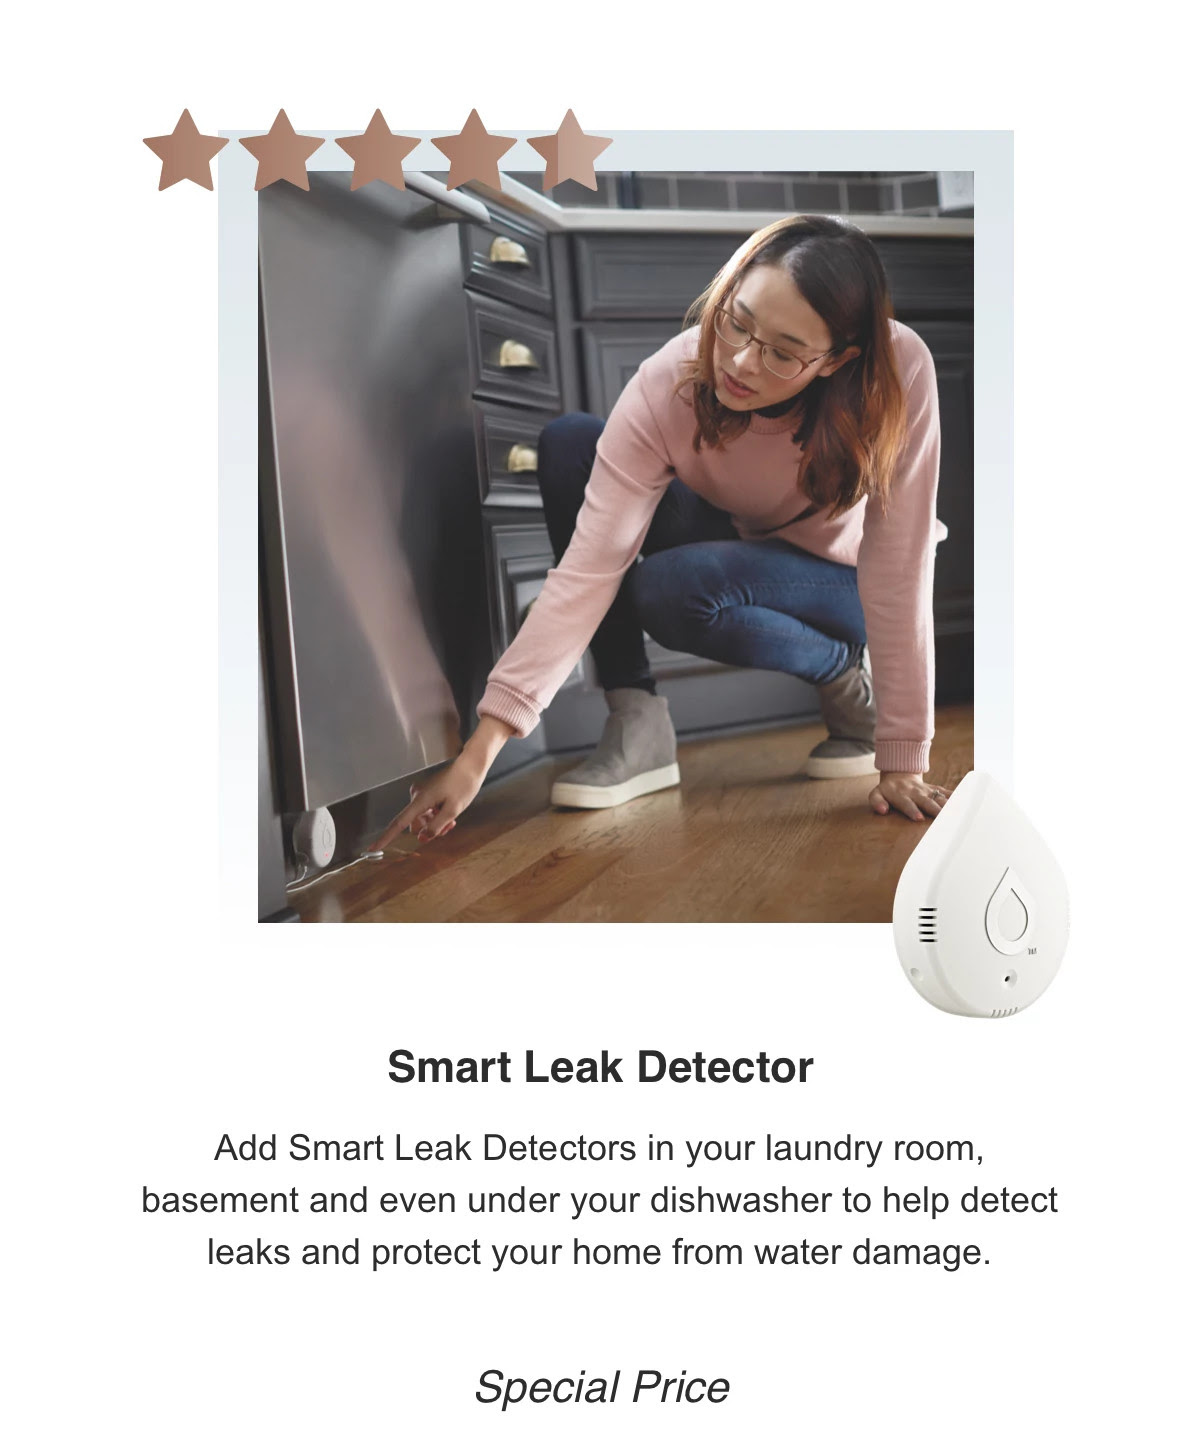 Smart Leak Detector - Add Smart Leak Detectors in your laundry room, basement and even under your dishwasher to help detect leaks and protect your home from water damage. Special Price